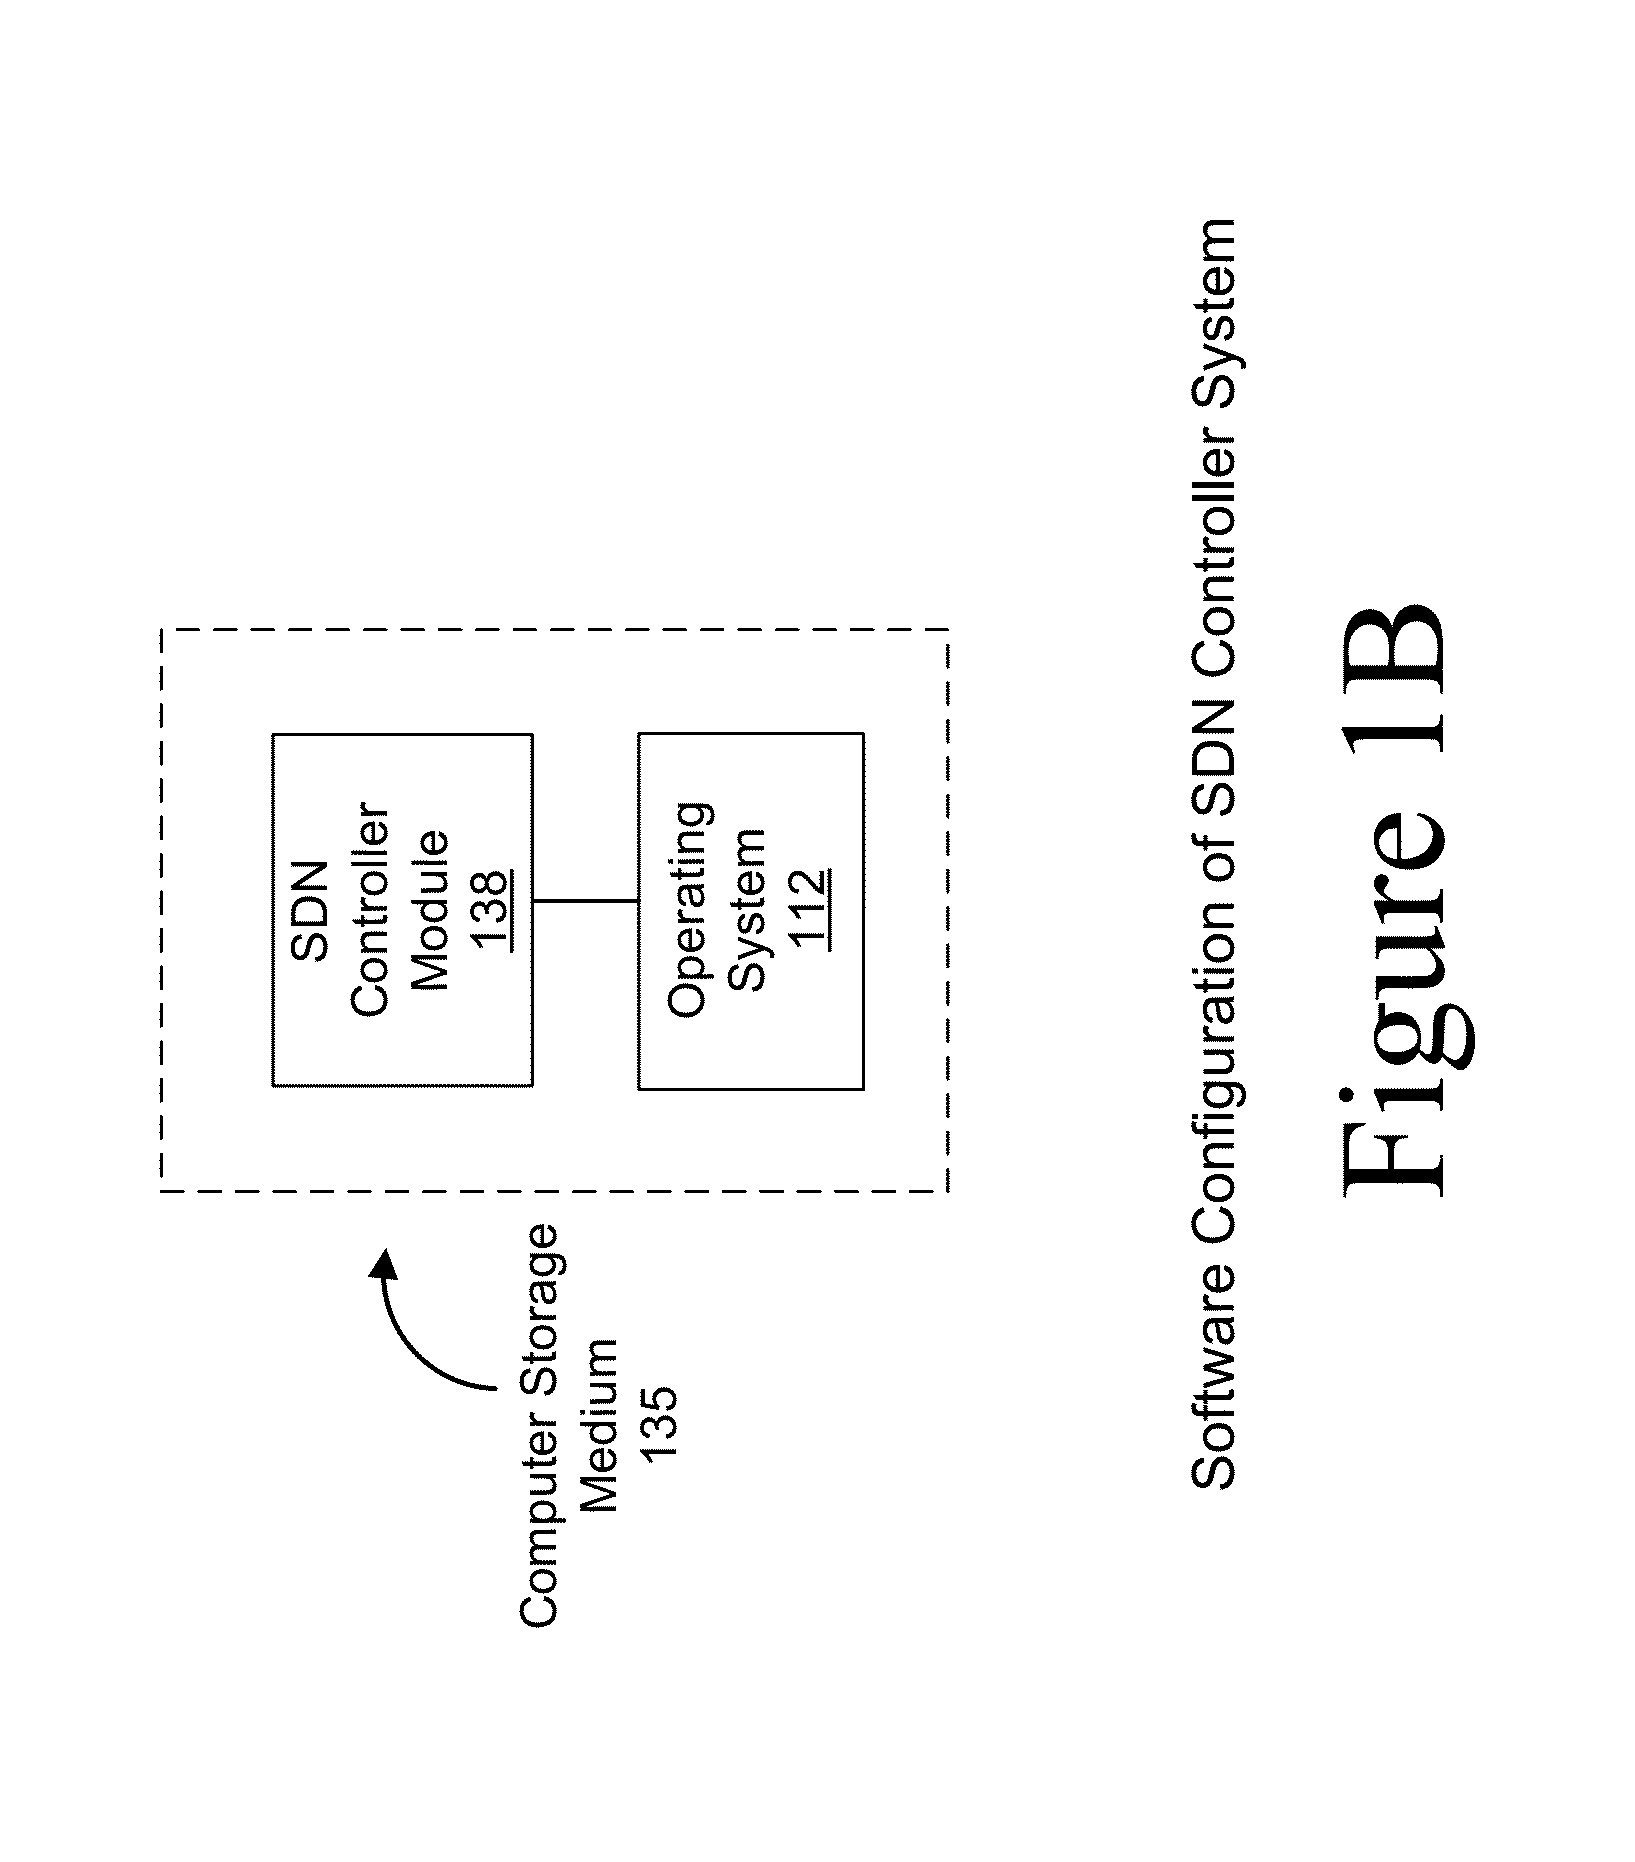 Physical switch initialization using representational state transfer services